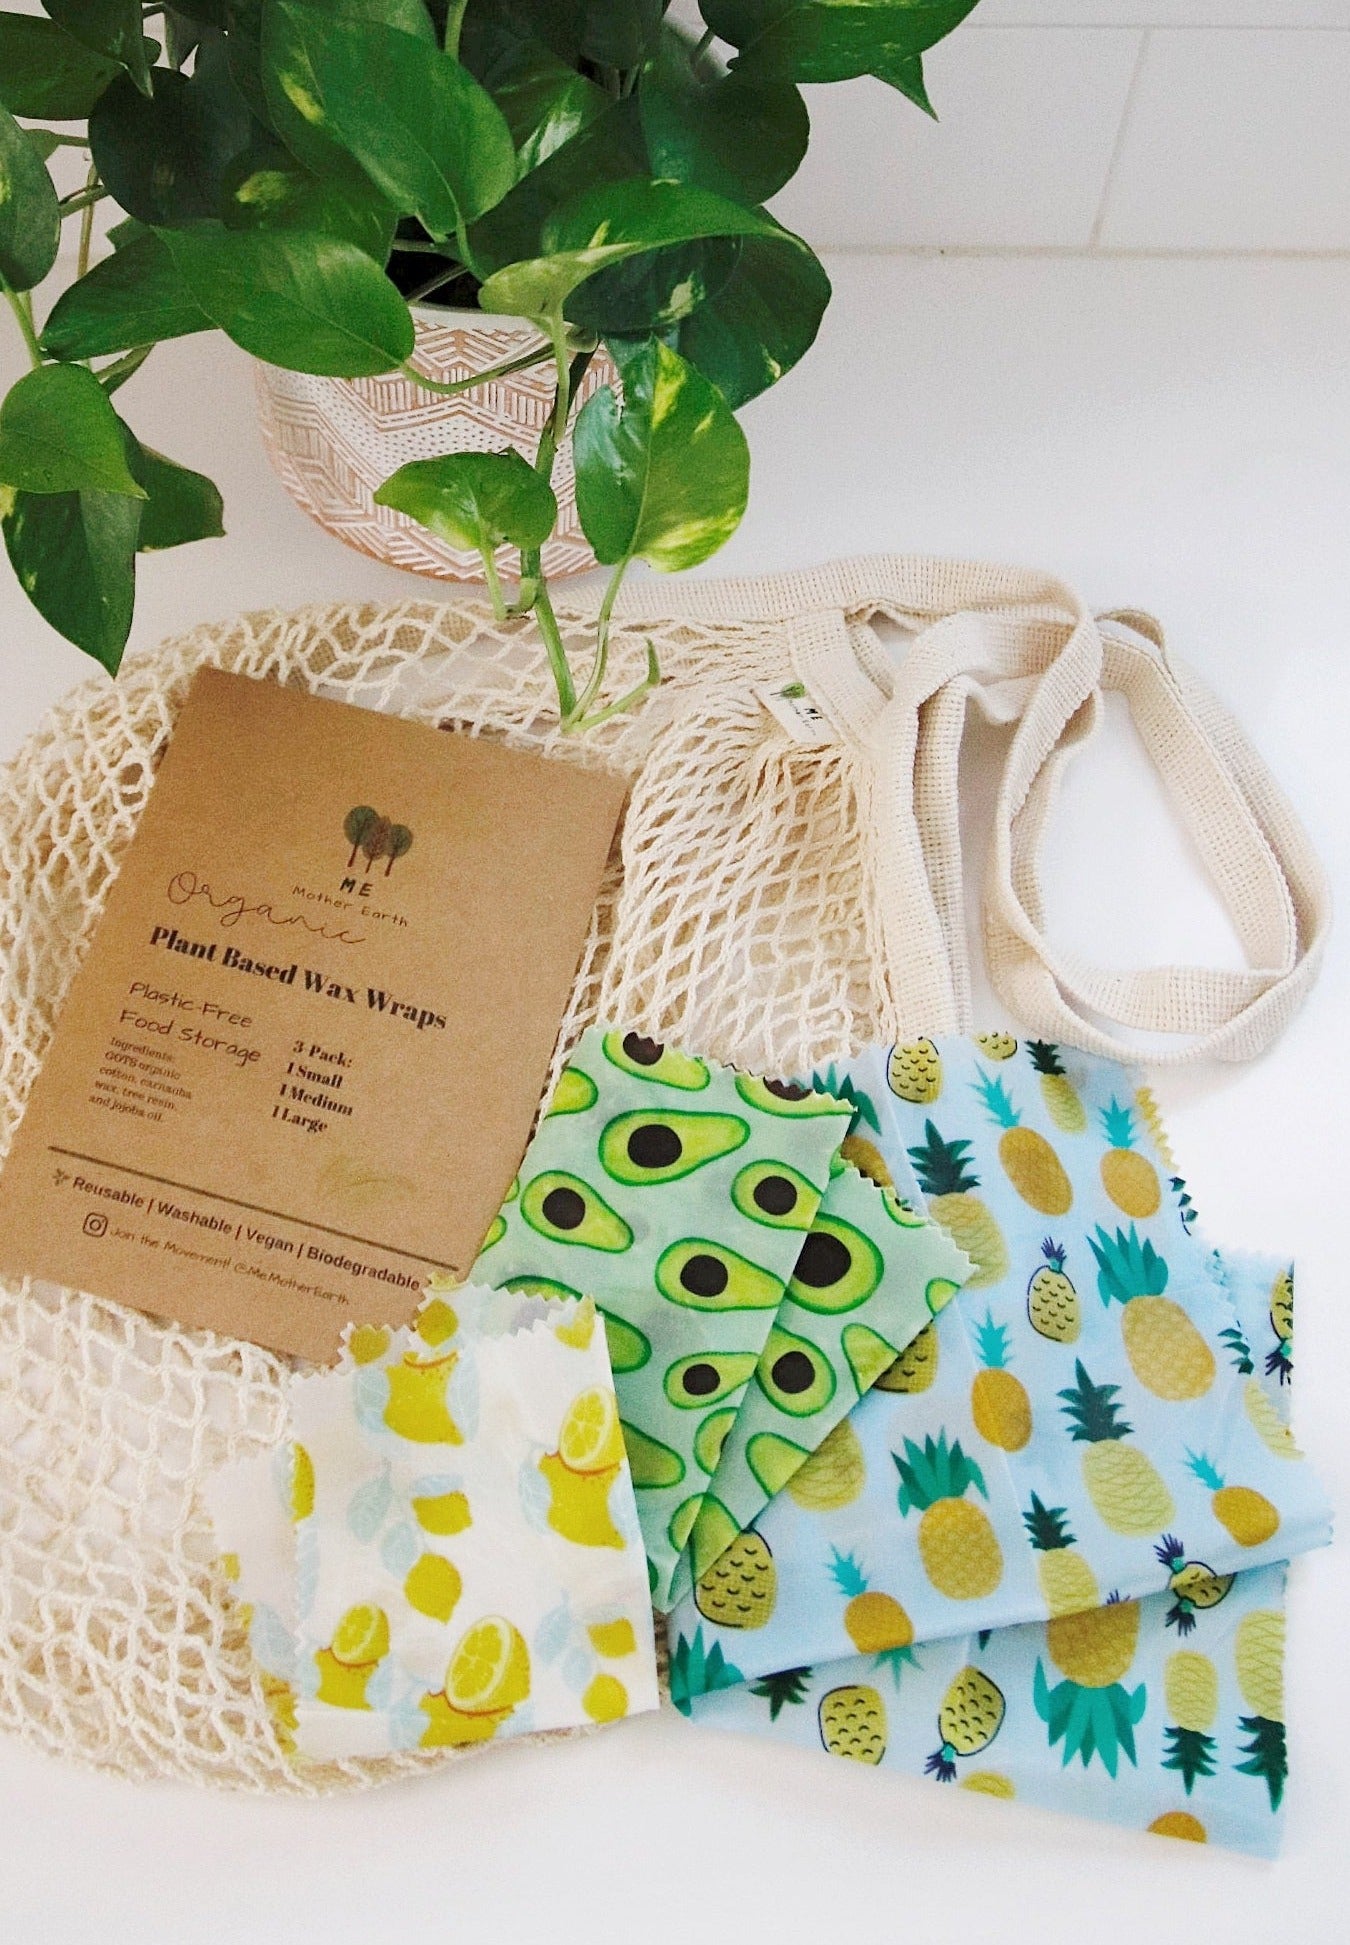 The Best Natural Beeswax Reusable Food Wraps Get Your Veggie On! – PÜR  Evergreen